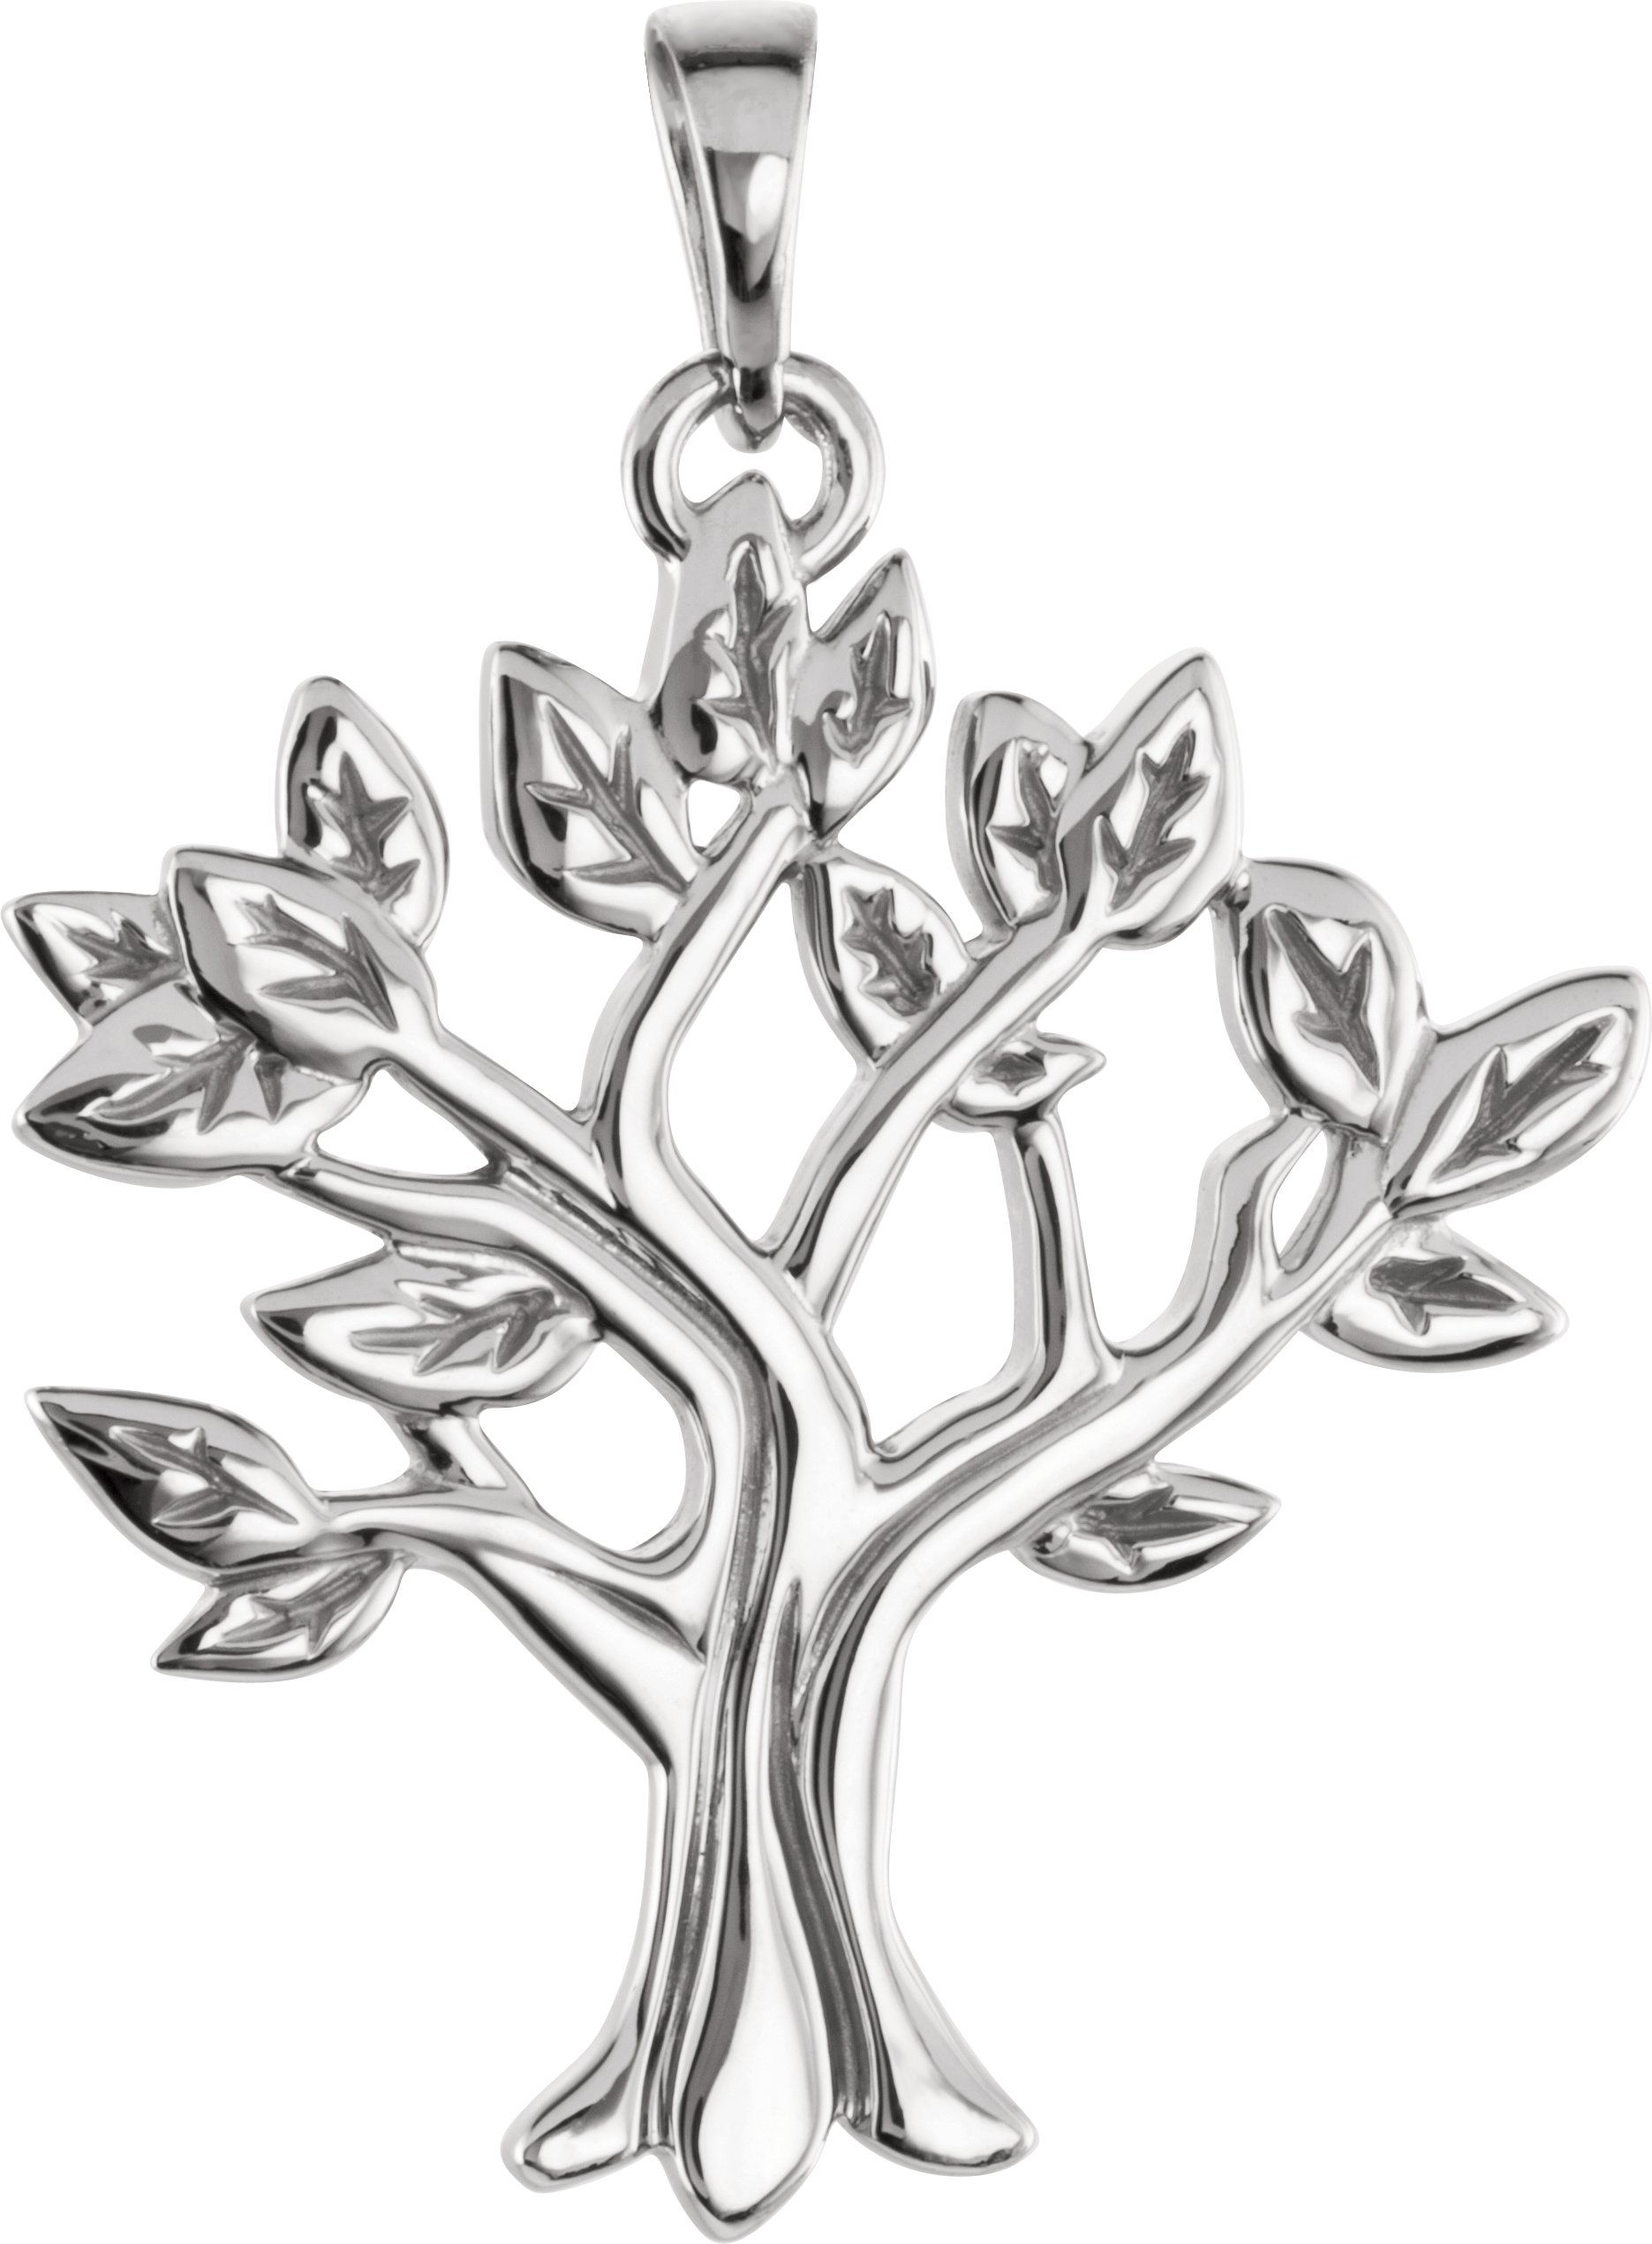 Sterling Silver My Tree Family Pendant Ref. 4940967